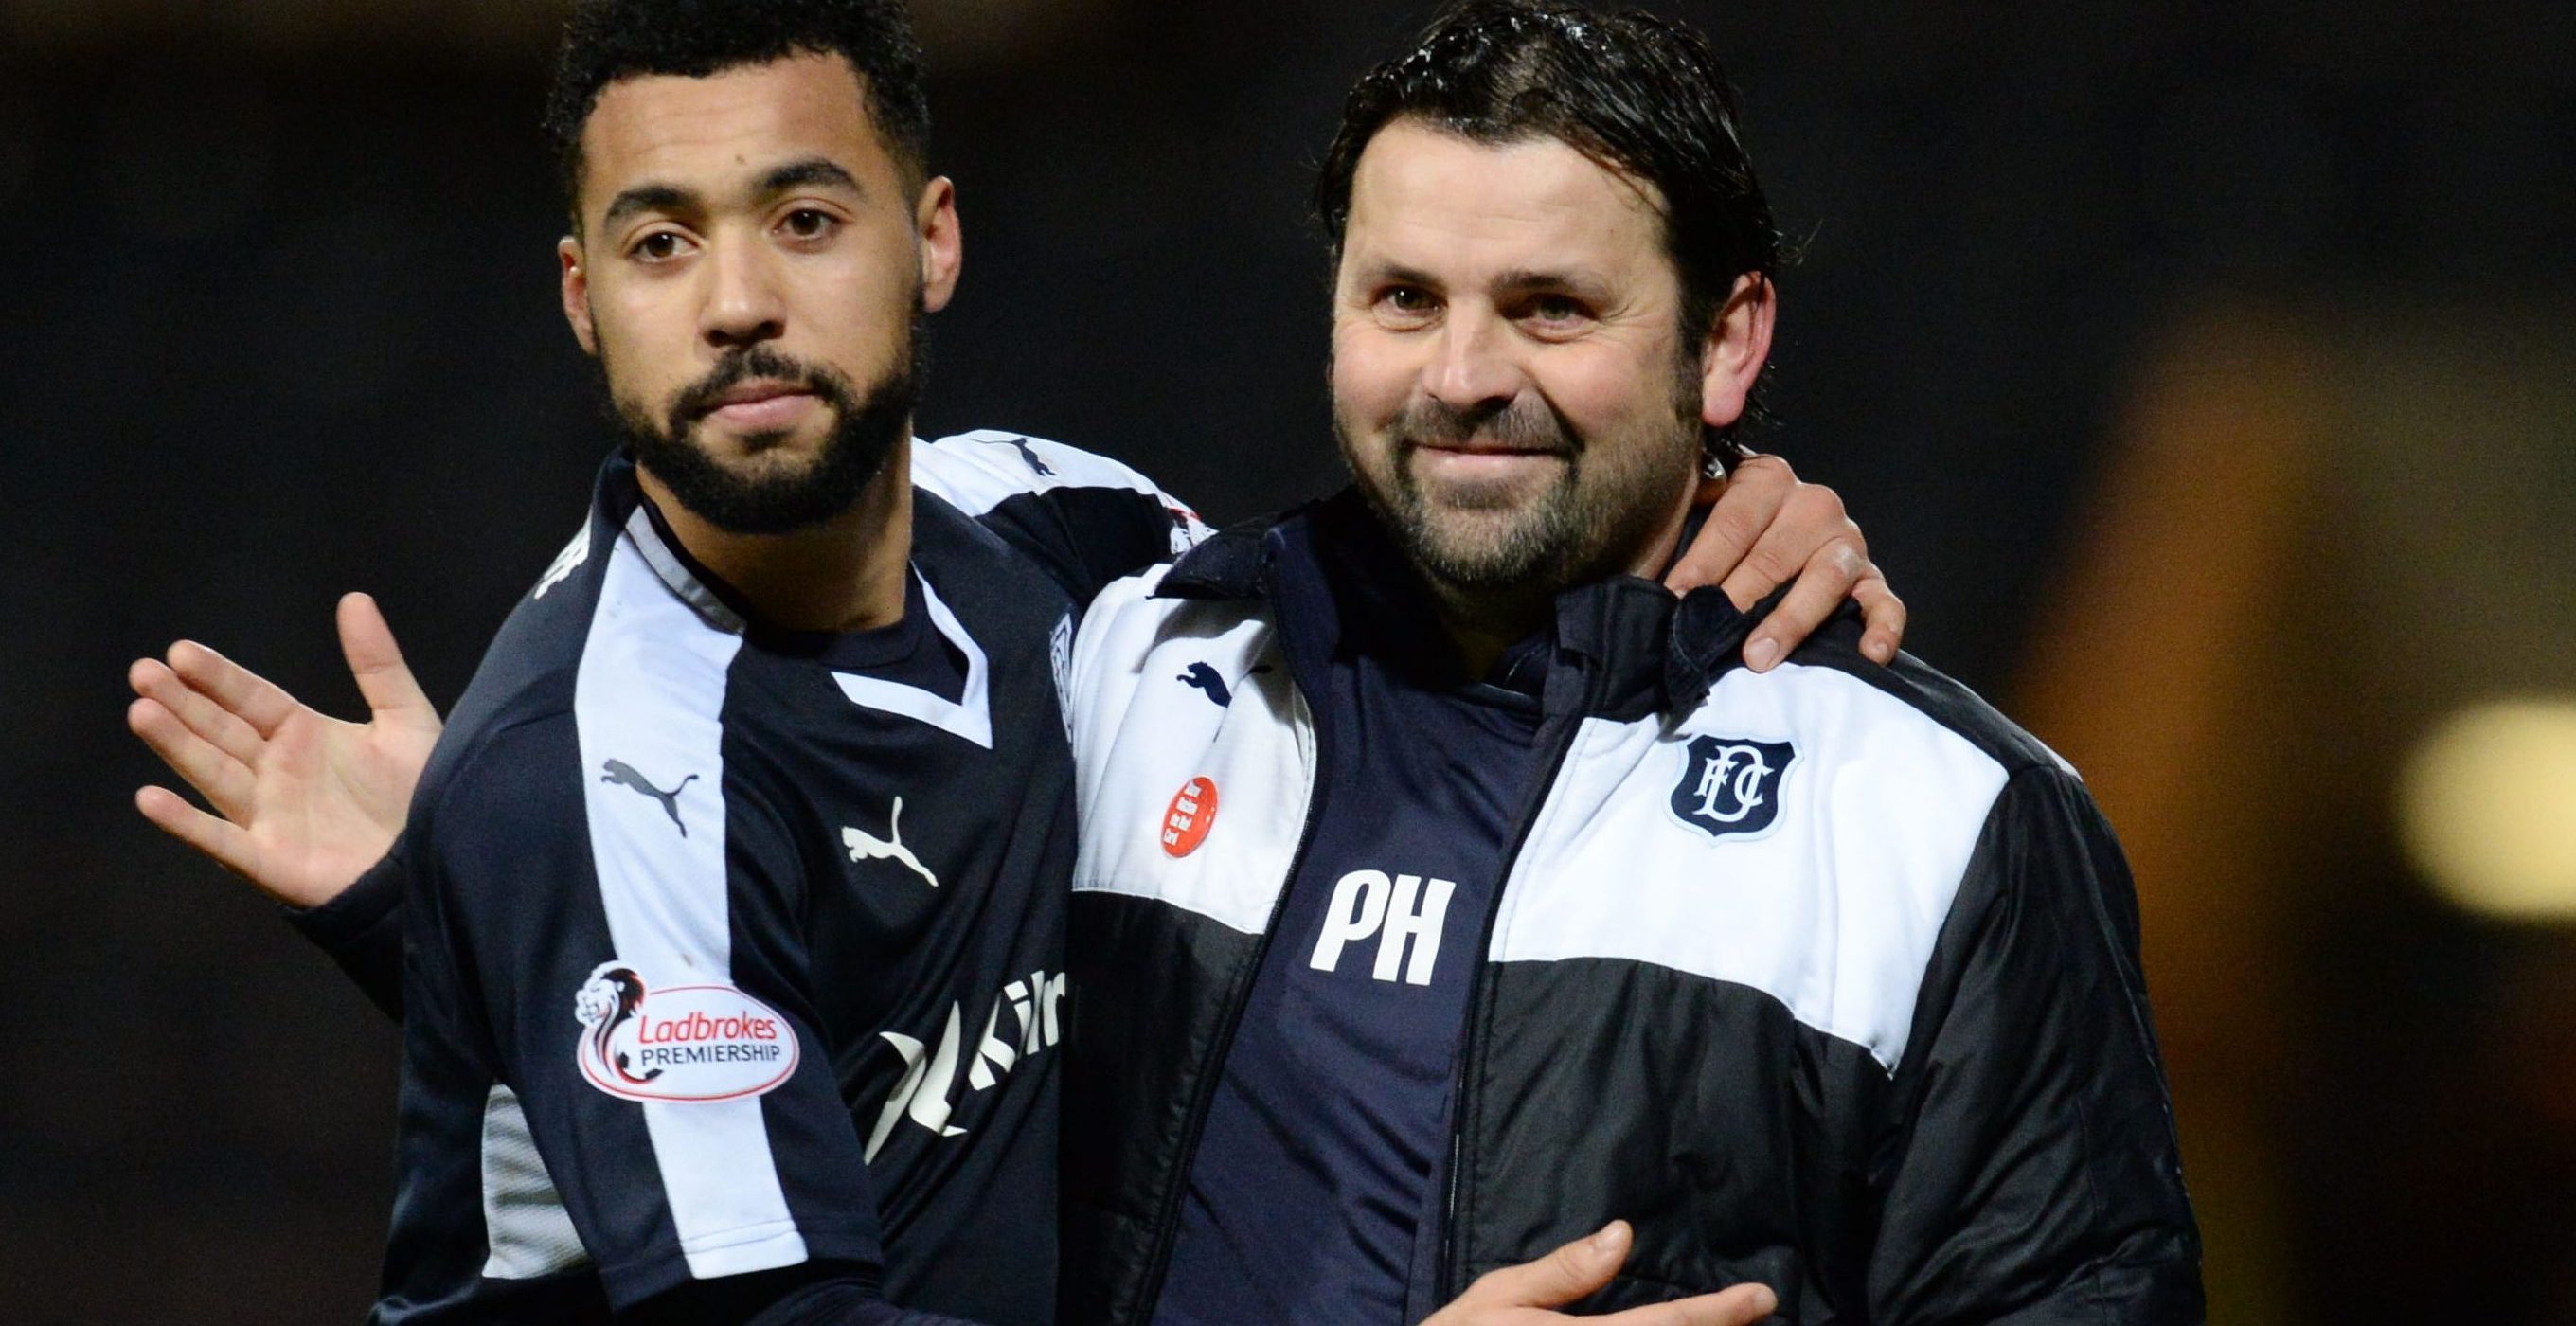 Paul Hartley with the star striker he has lost.